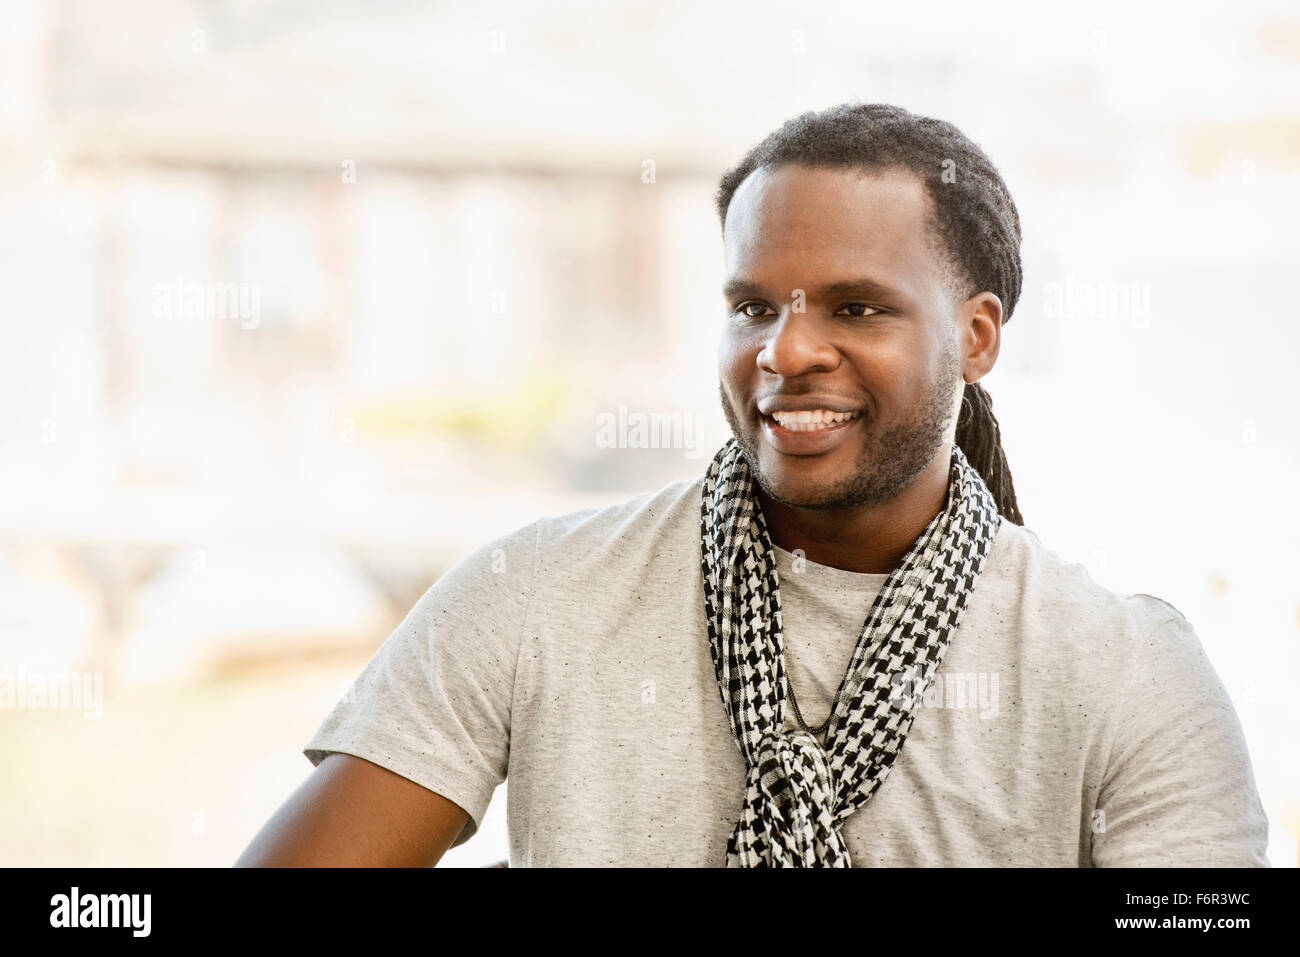 African American man smiling indoors Stock Photo